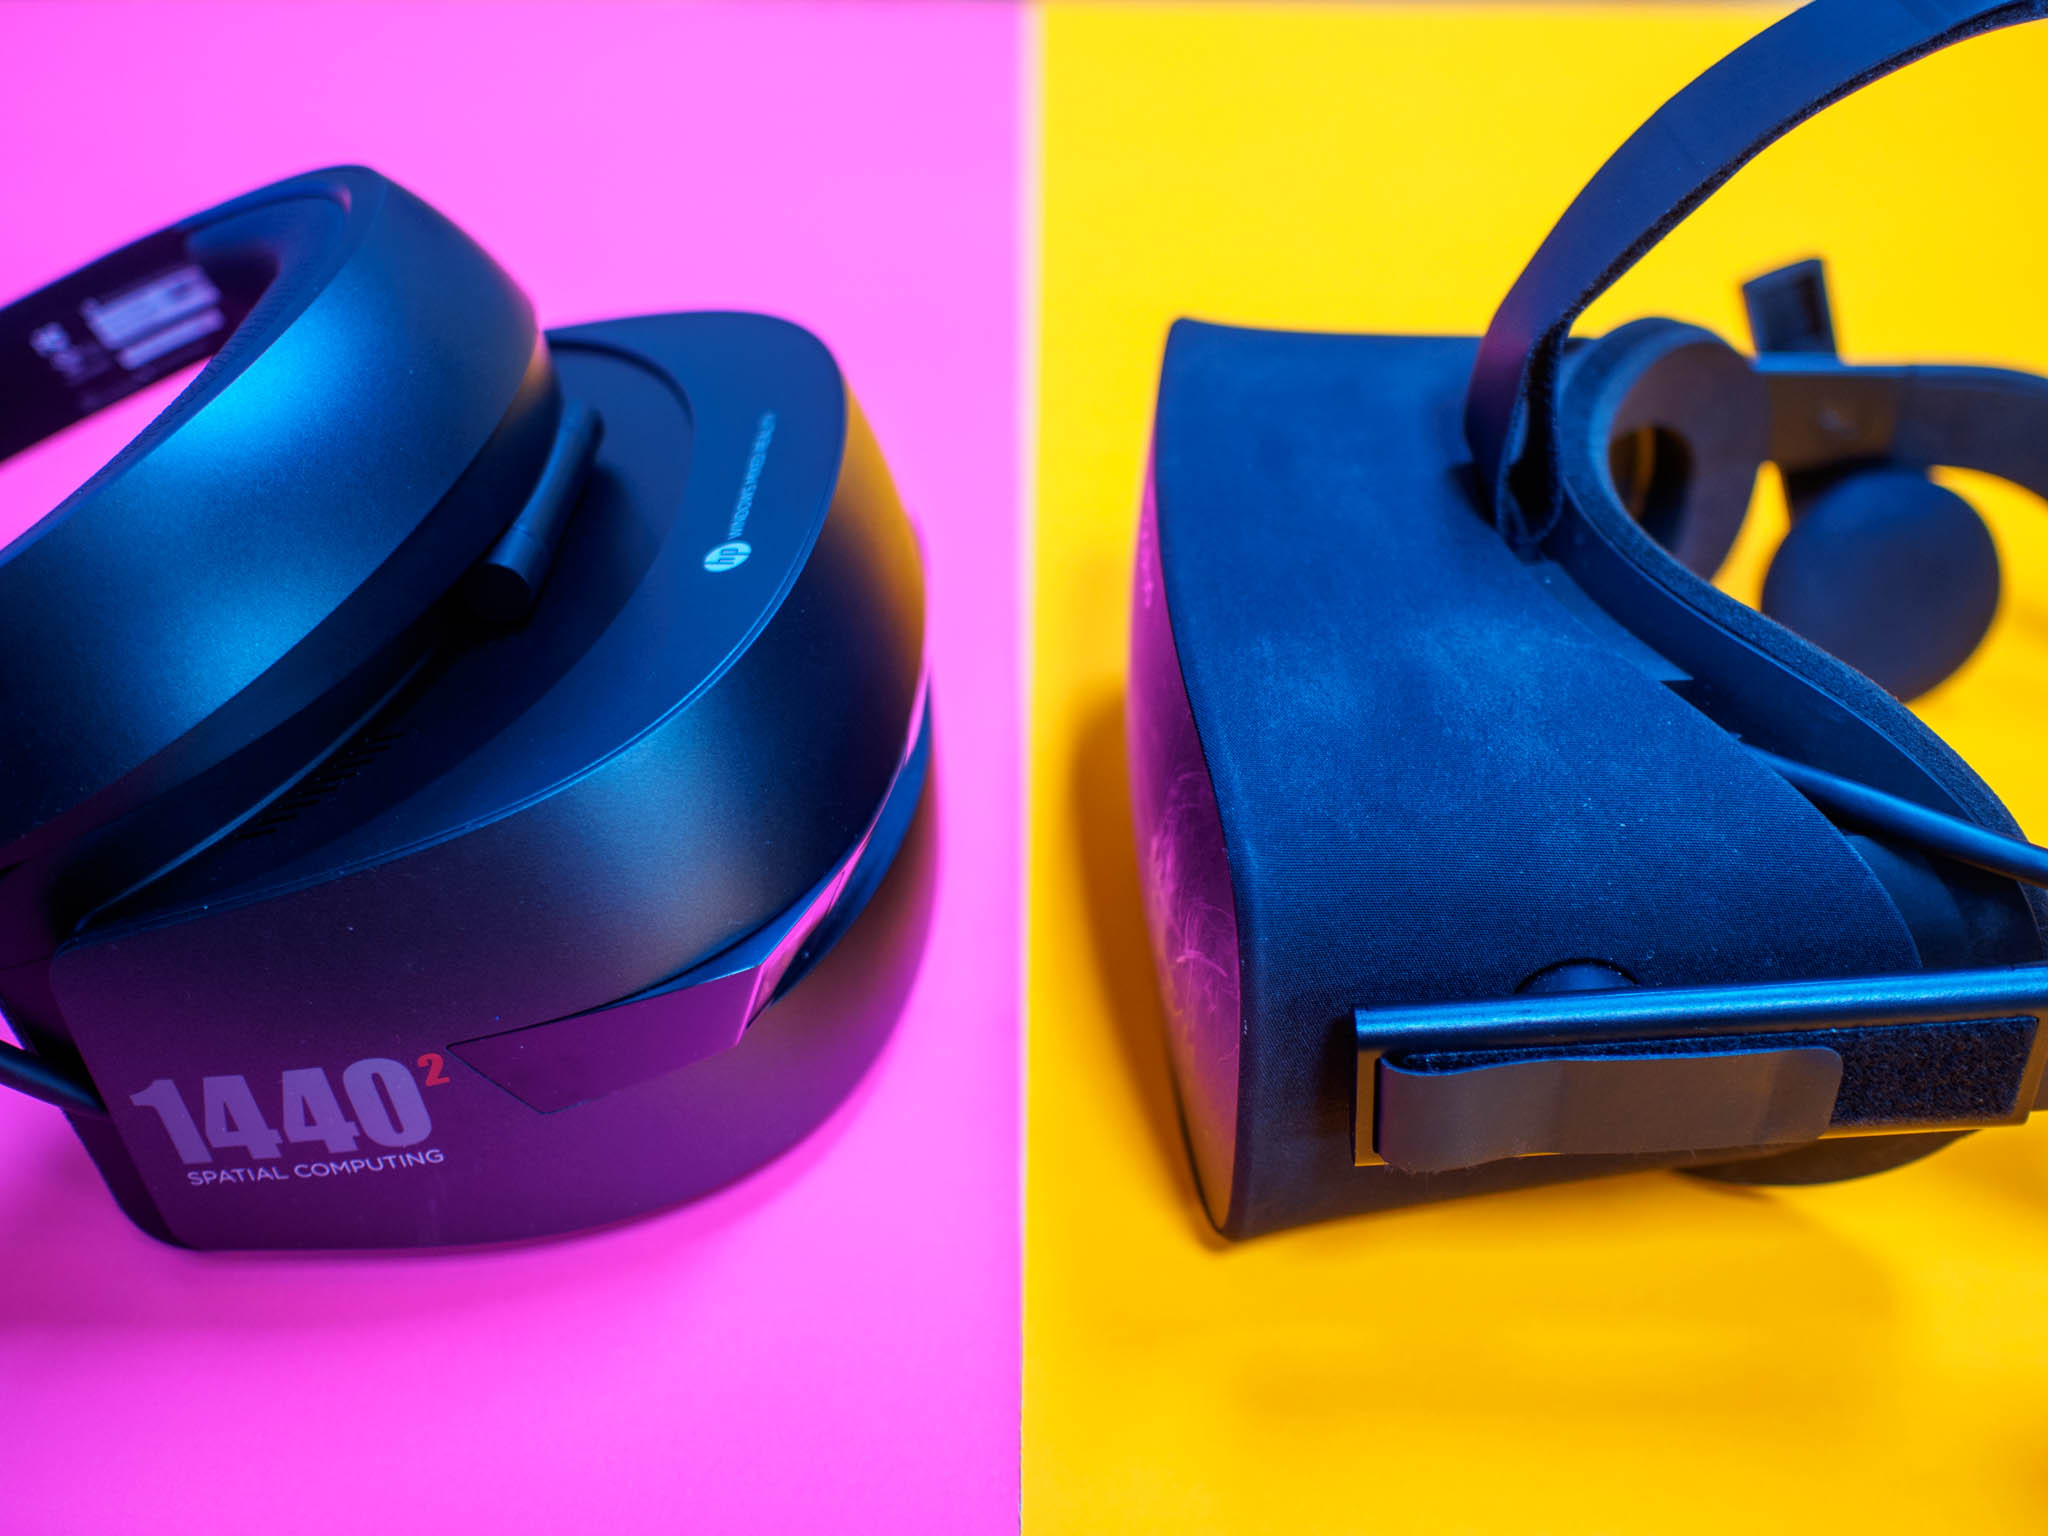 Windows Mixed vs. Oculus Rift: Which should you buy? | Windows